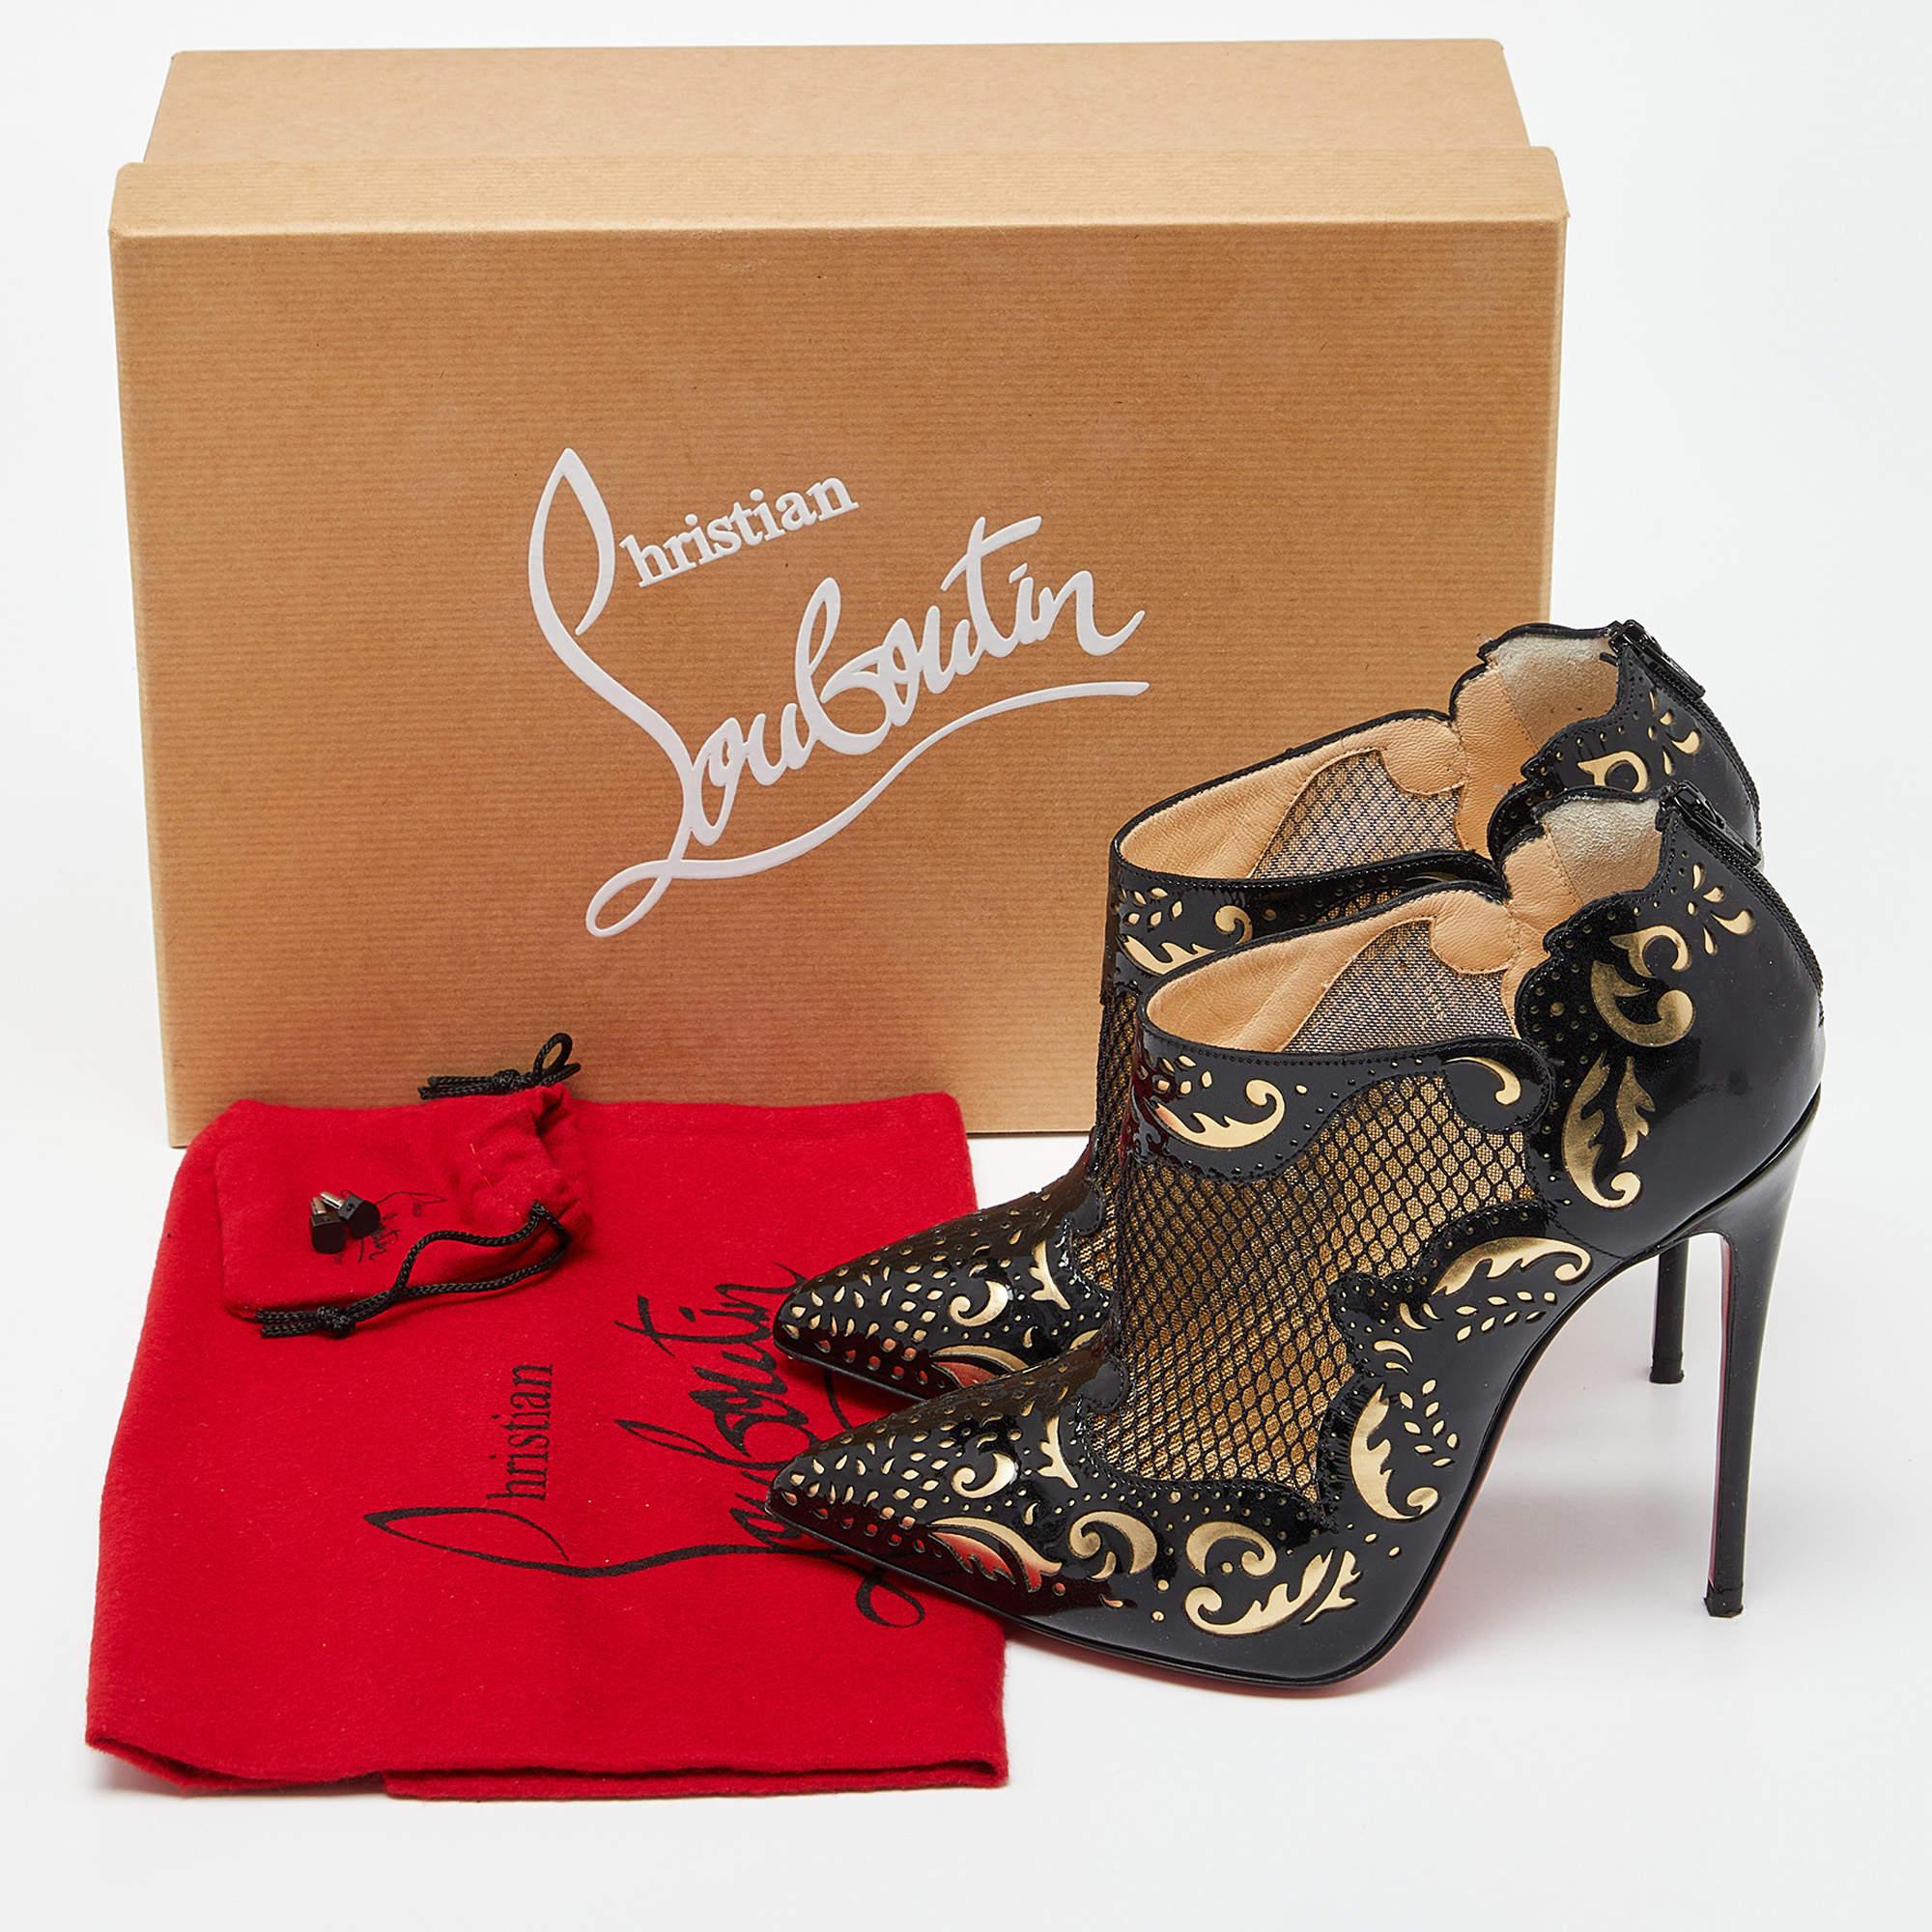 Christian Louboutin Black/Gold Laser Cut Patent Leather Mandolina Booties Size 3 For Sale 3